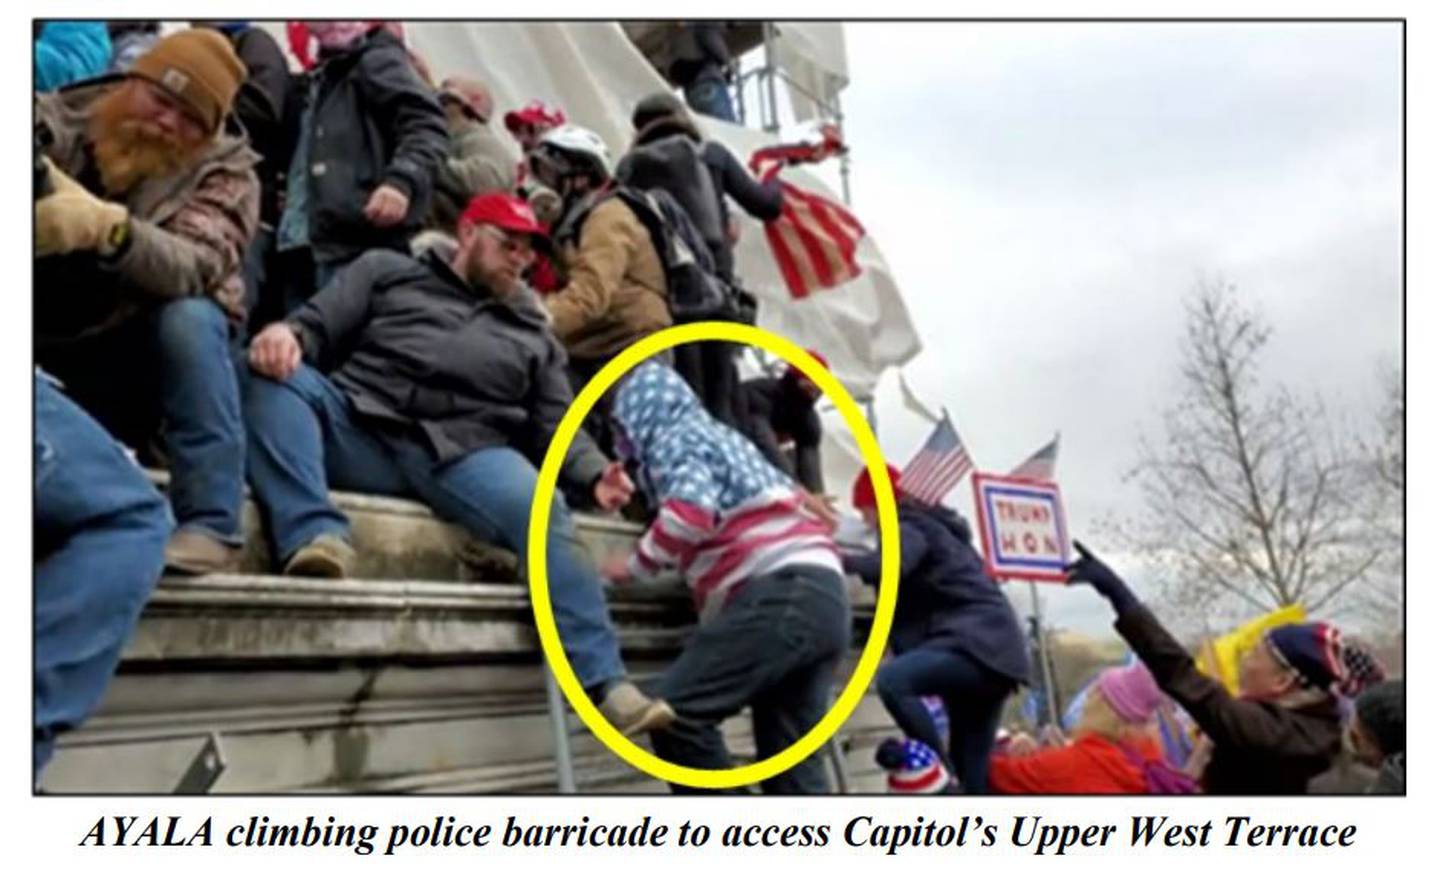 An image from federal court documents allegedly shows Carlos Ayala at the U.S. Capitol on Jan. 6, 2021. Ayala is charged with civil disorder and other charges.